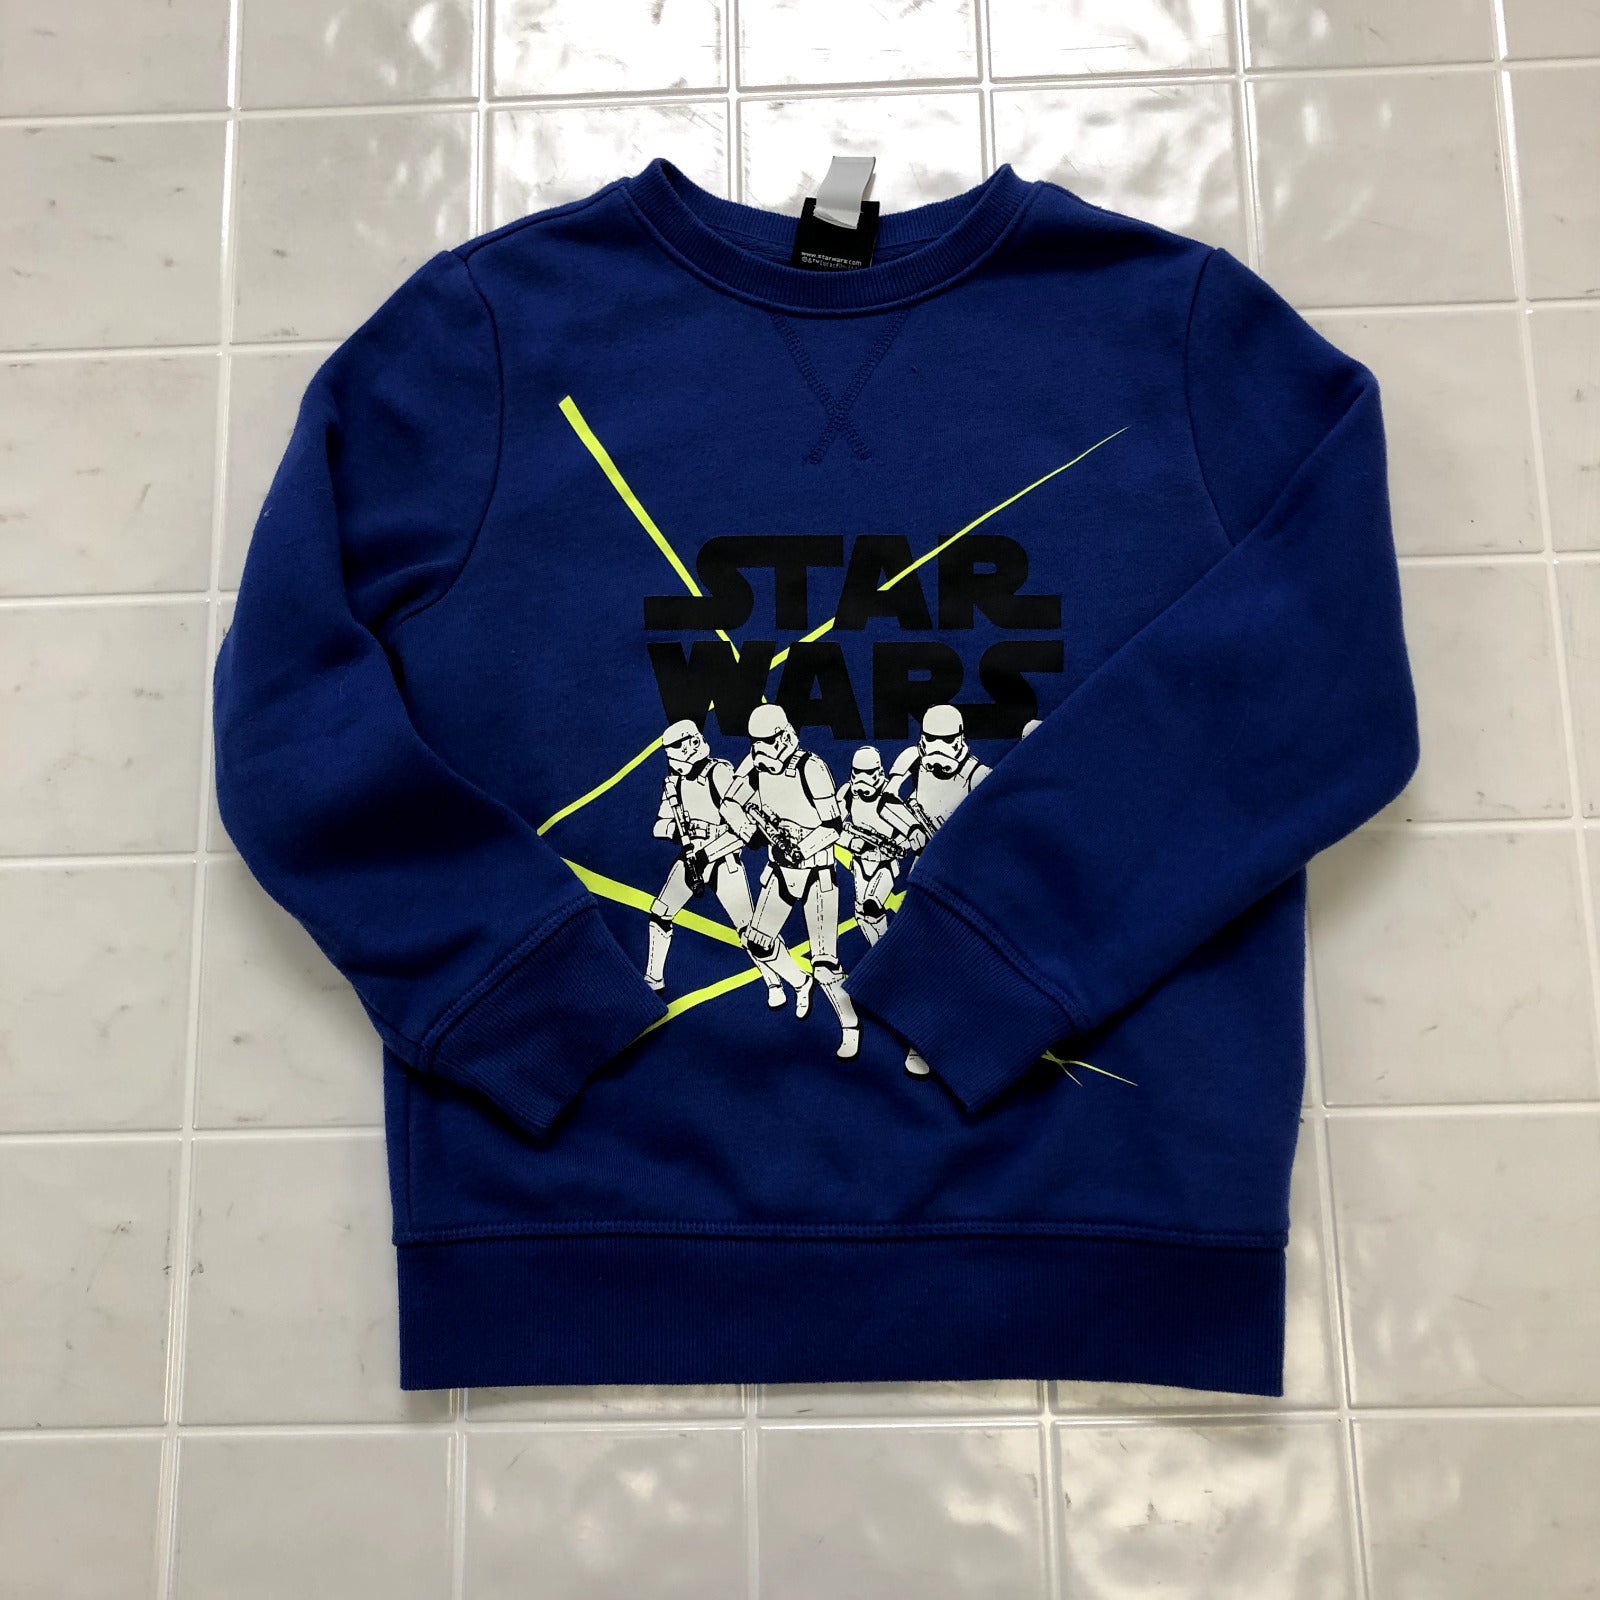 Star Wars Blue Graphic Logo Regular Fit Casual Loose Sweatshirt Youth Size S